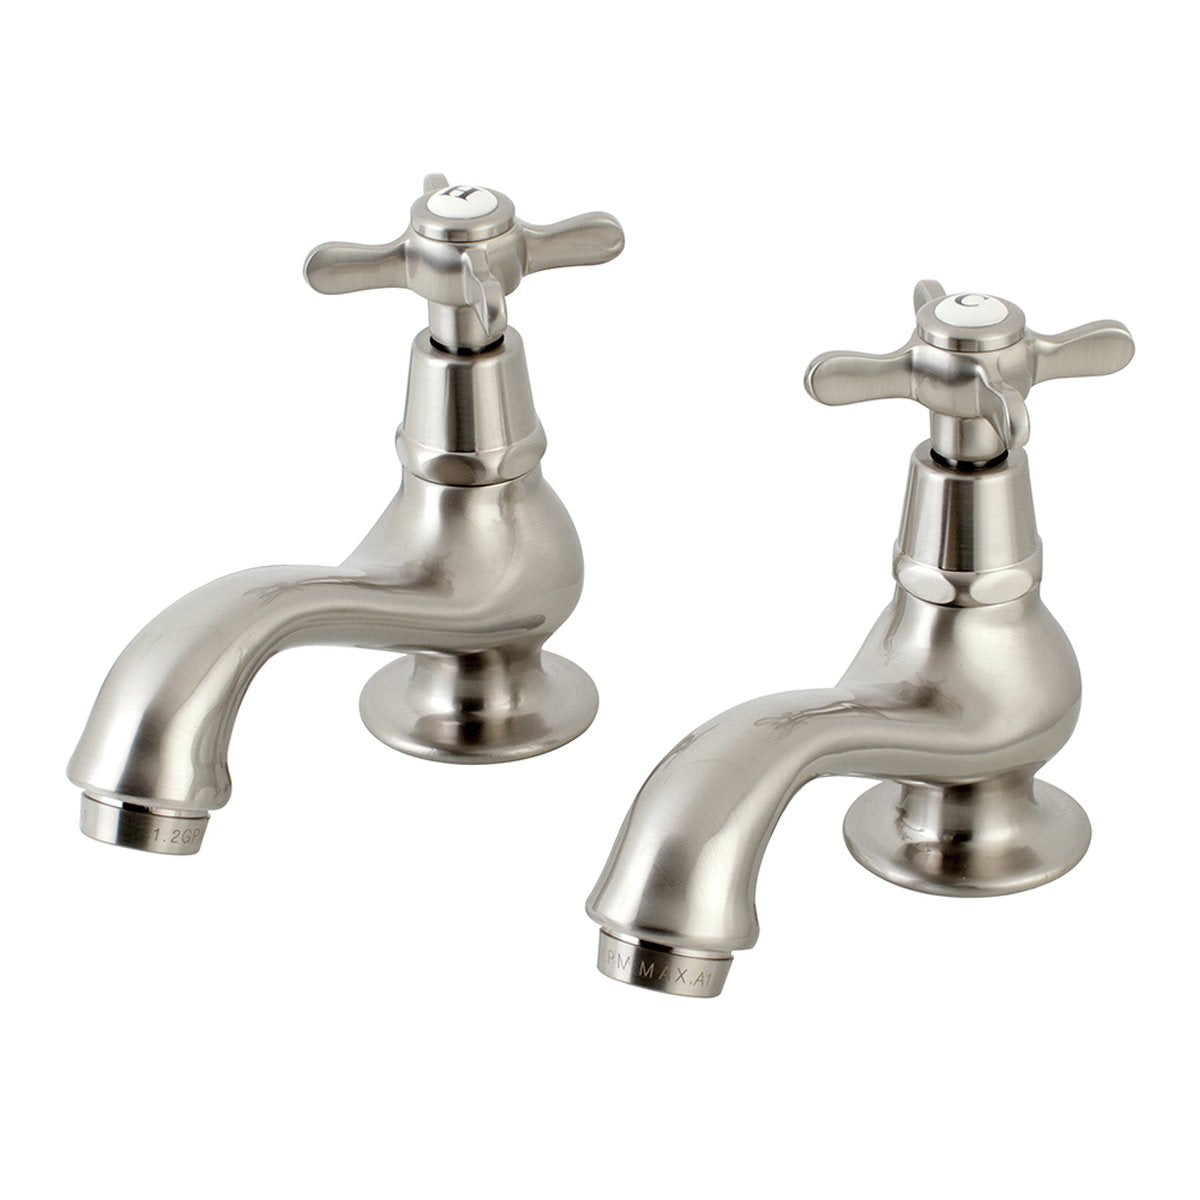 Kingston Brass Essex Basin Tap Faucet with Cross Handle-Bathroom Faucets-Free Shipping-Directsinks.